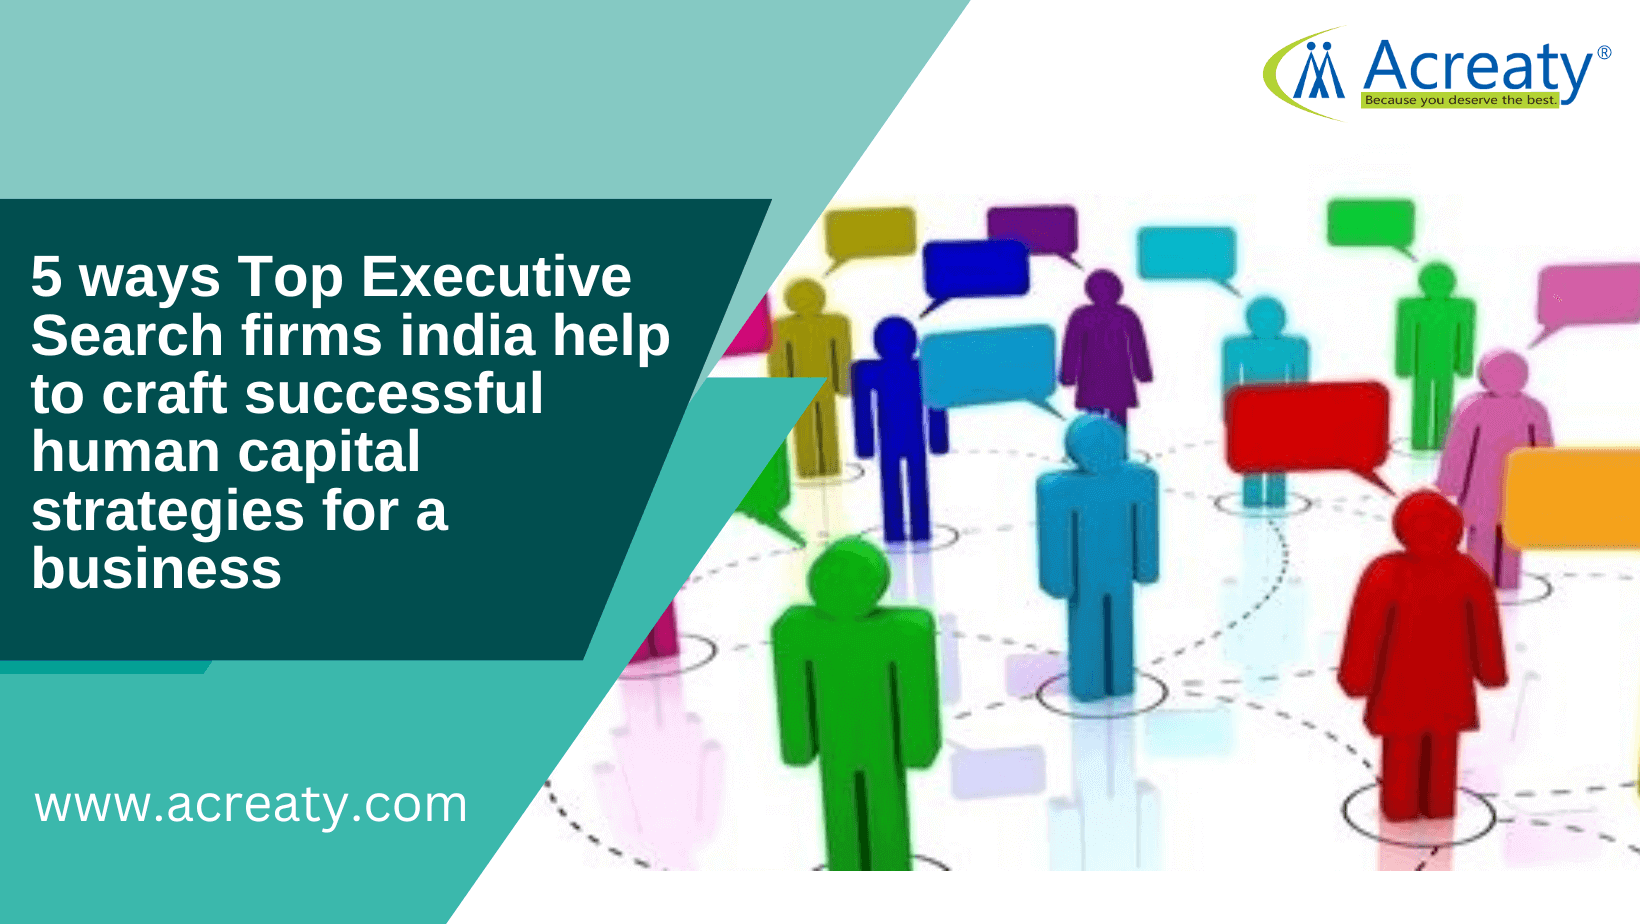 5 ways Top Executive Search firms india help to craft successful human capital strategies for a business